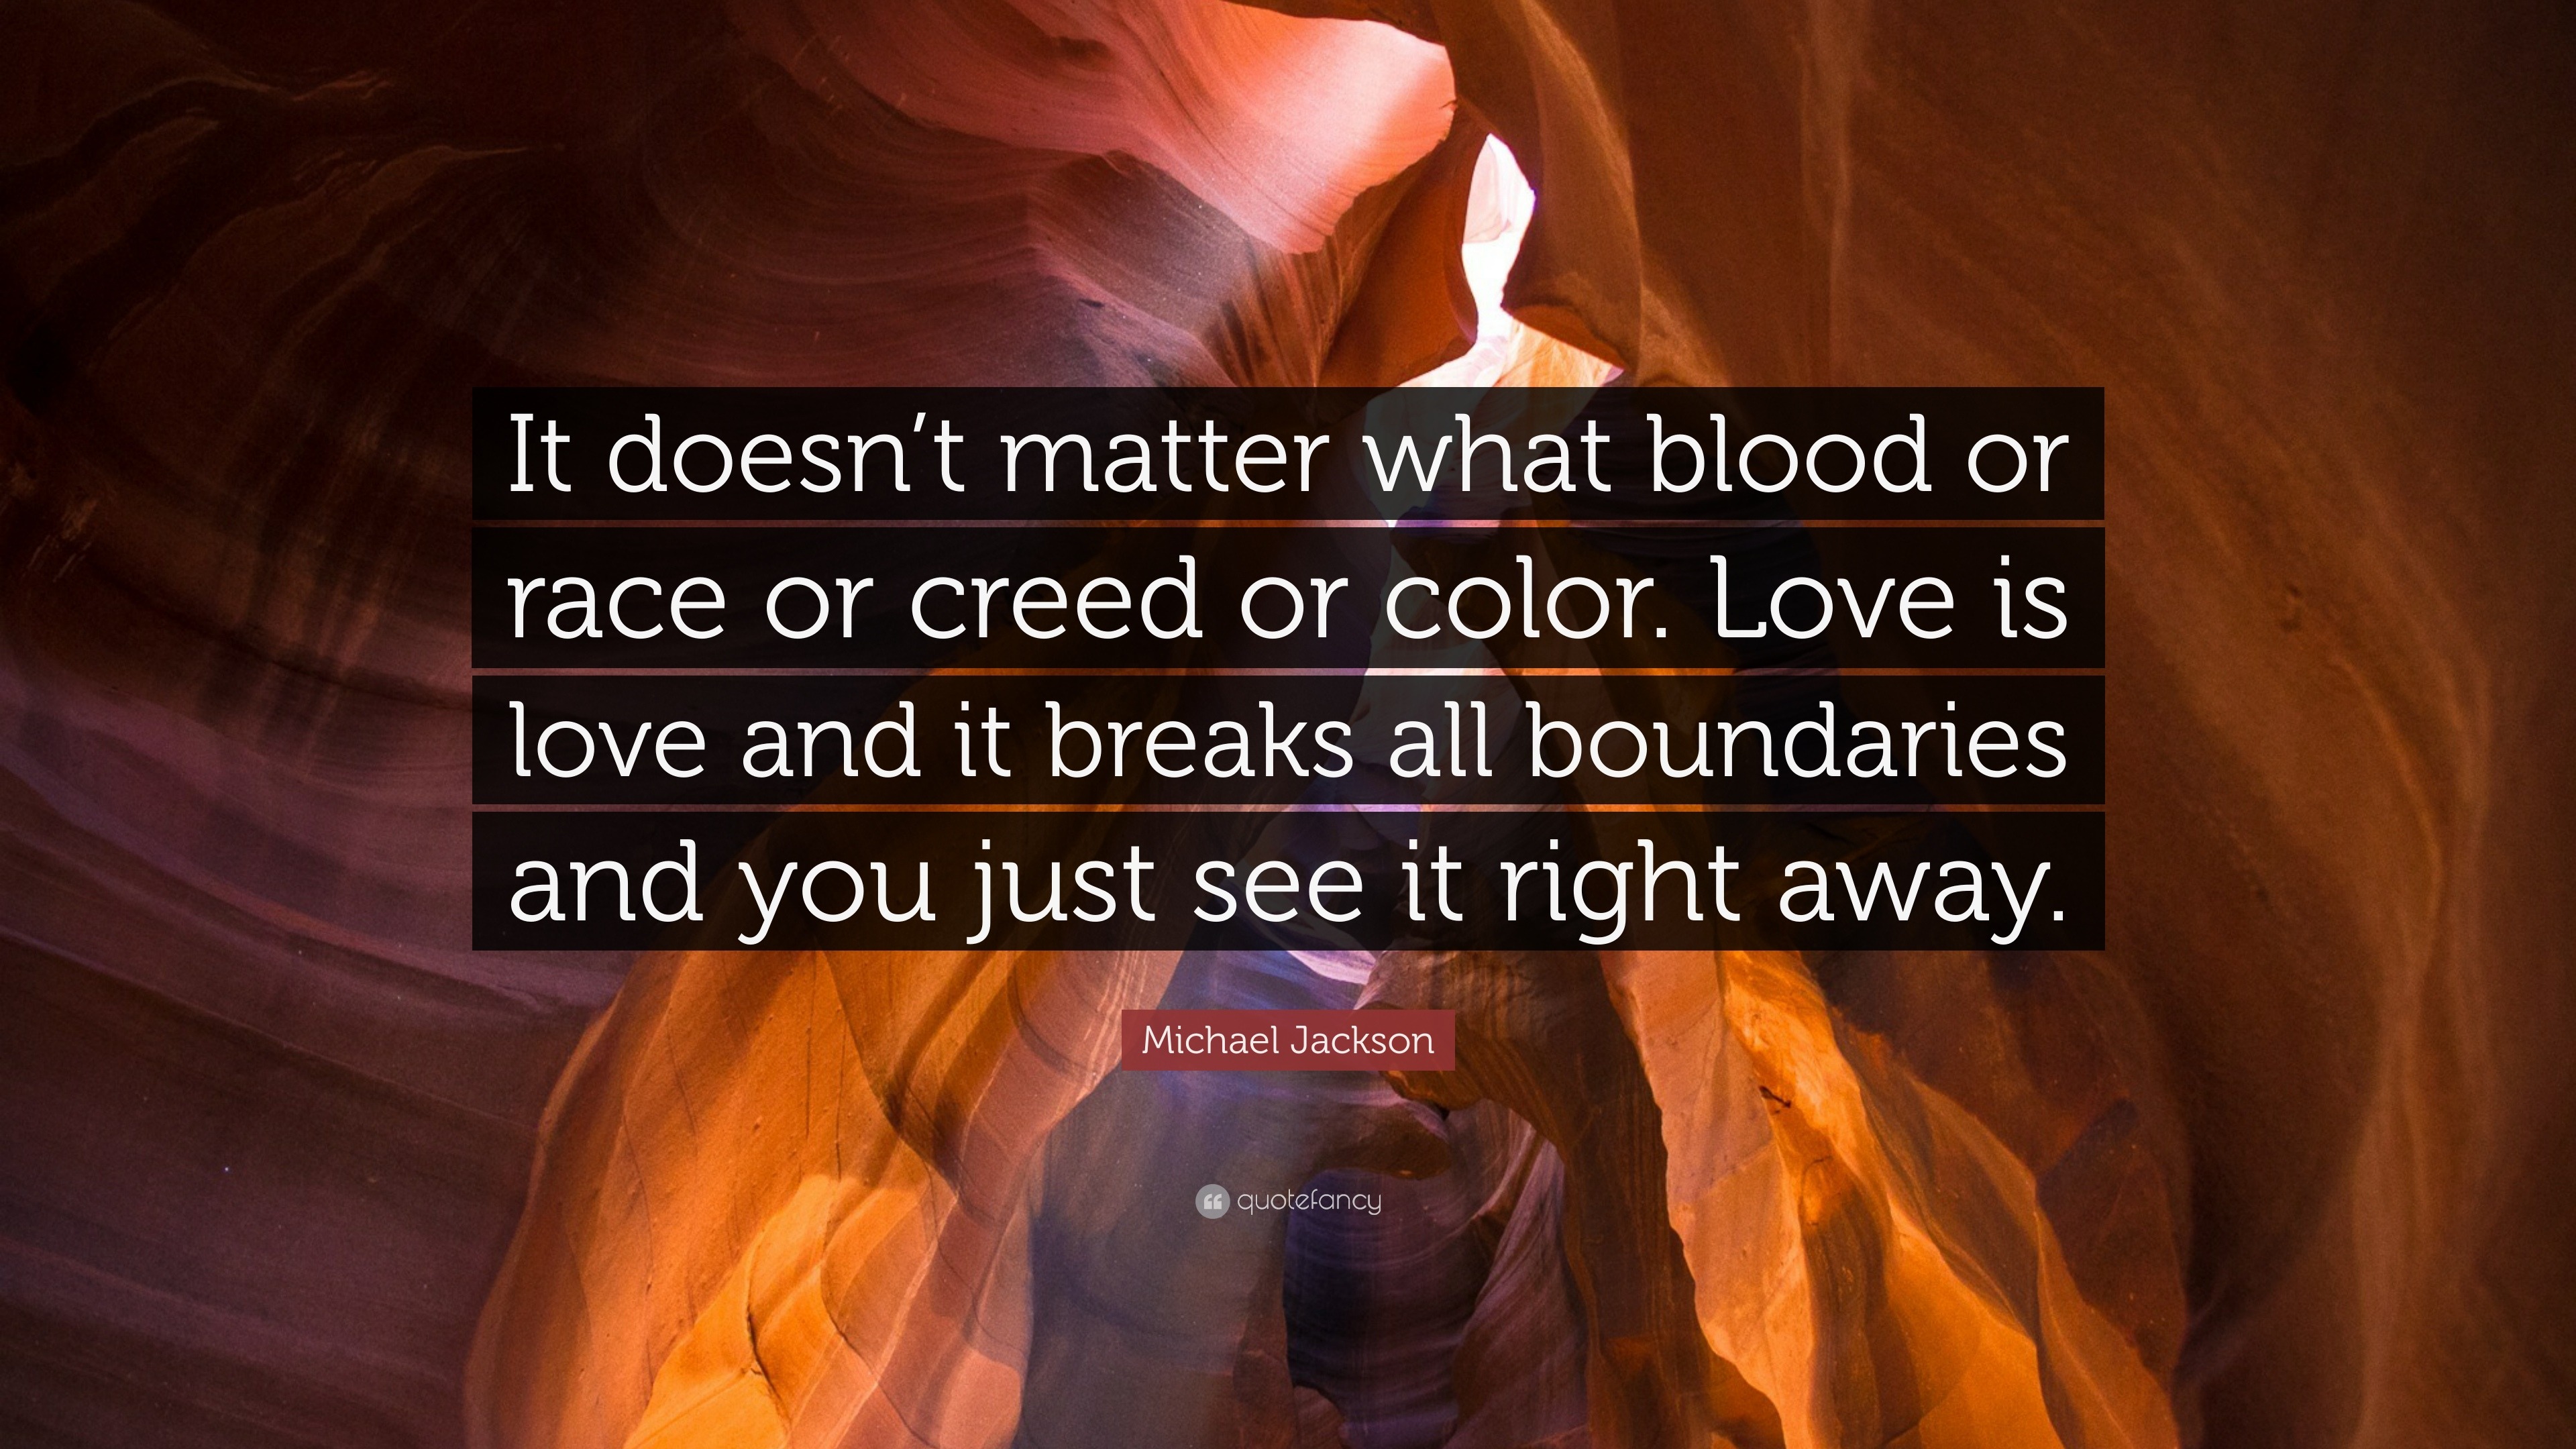 Michael Jackson Quote “It doesn’t matter what blood or